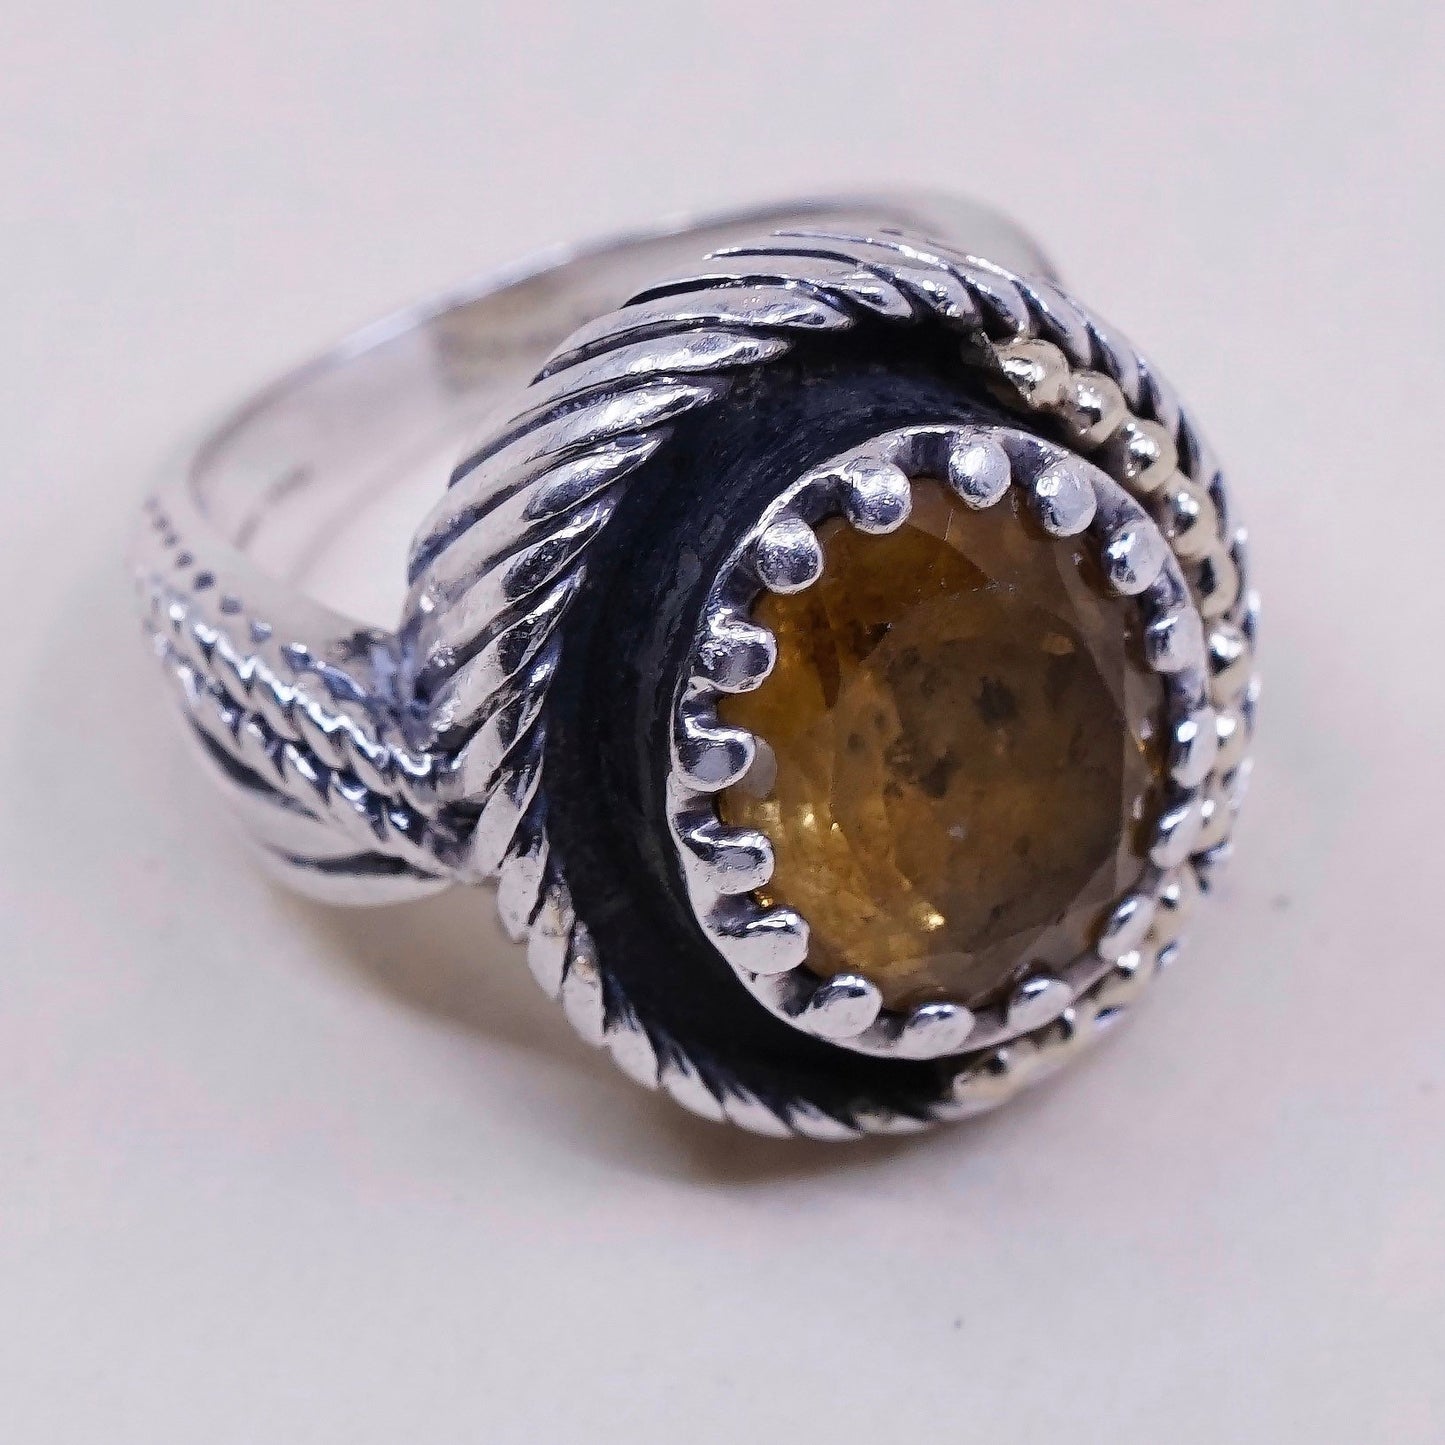 Size 6, vtg PRG two Tone 14K gold trim w/ sterling 925 silver ring with citrine